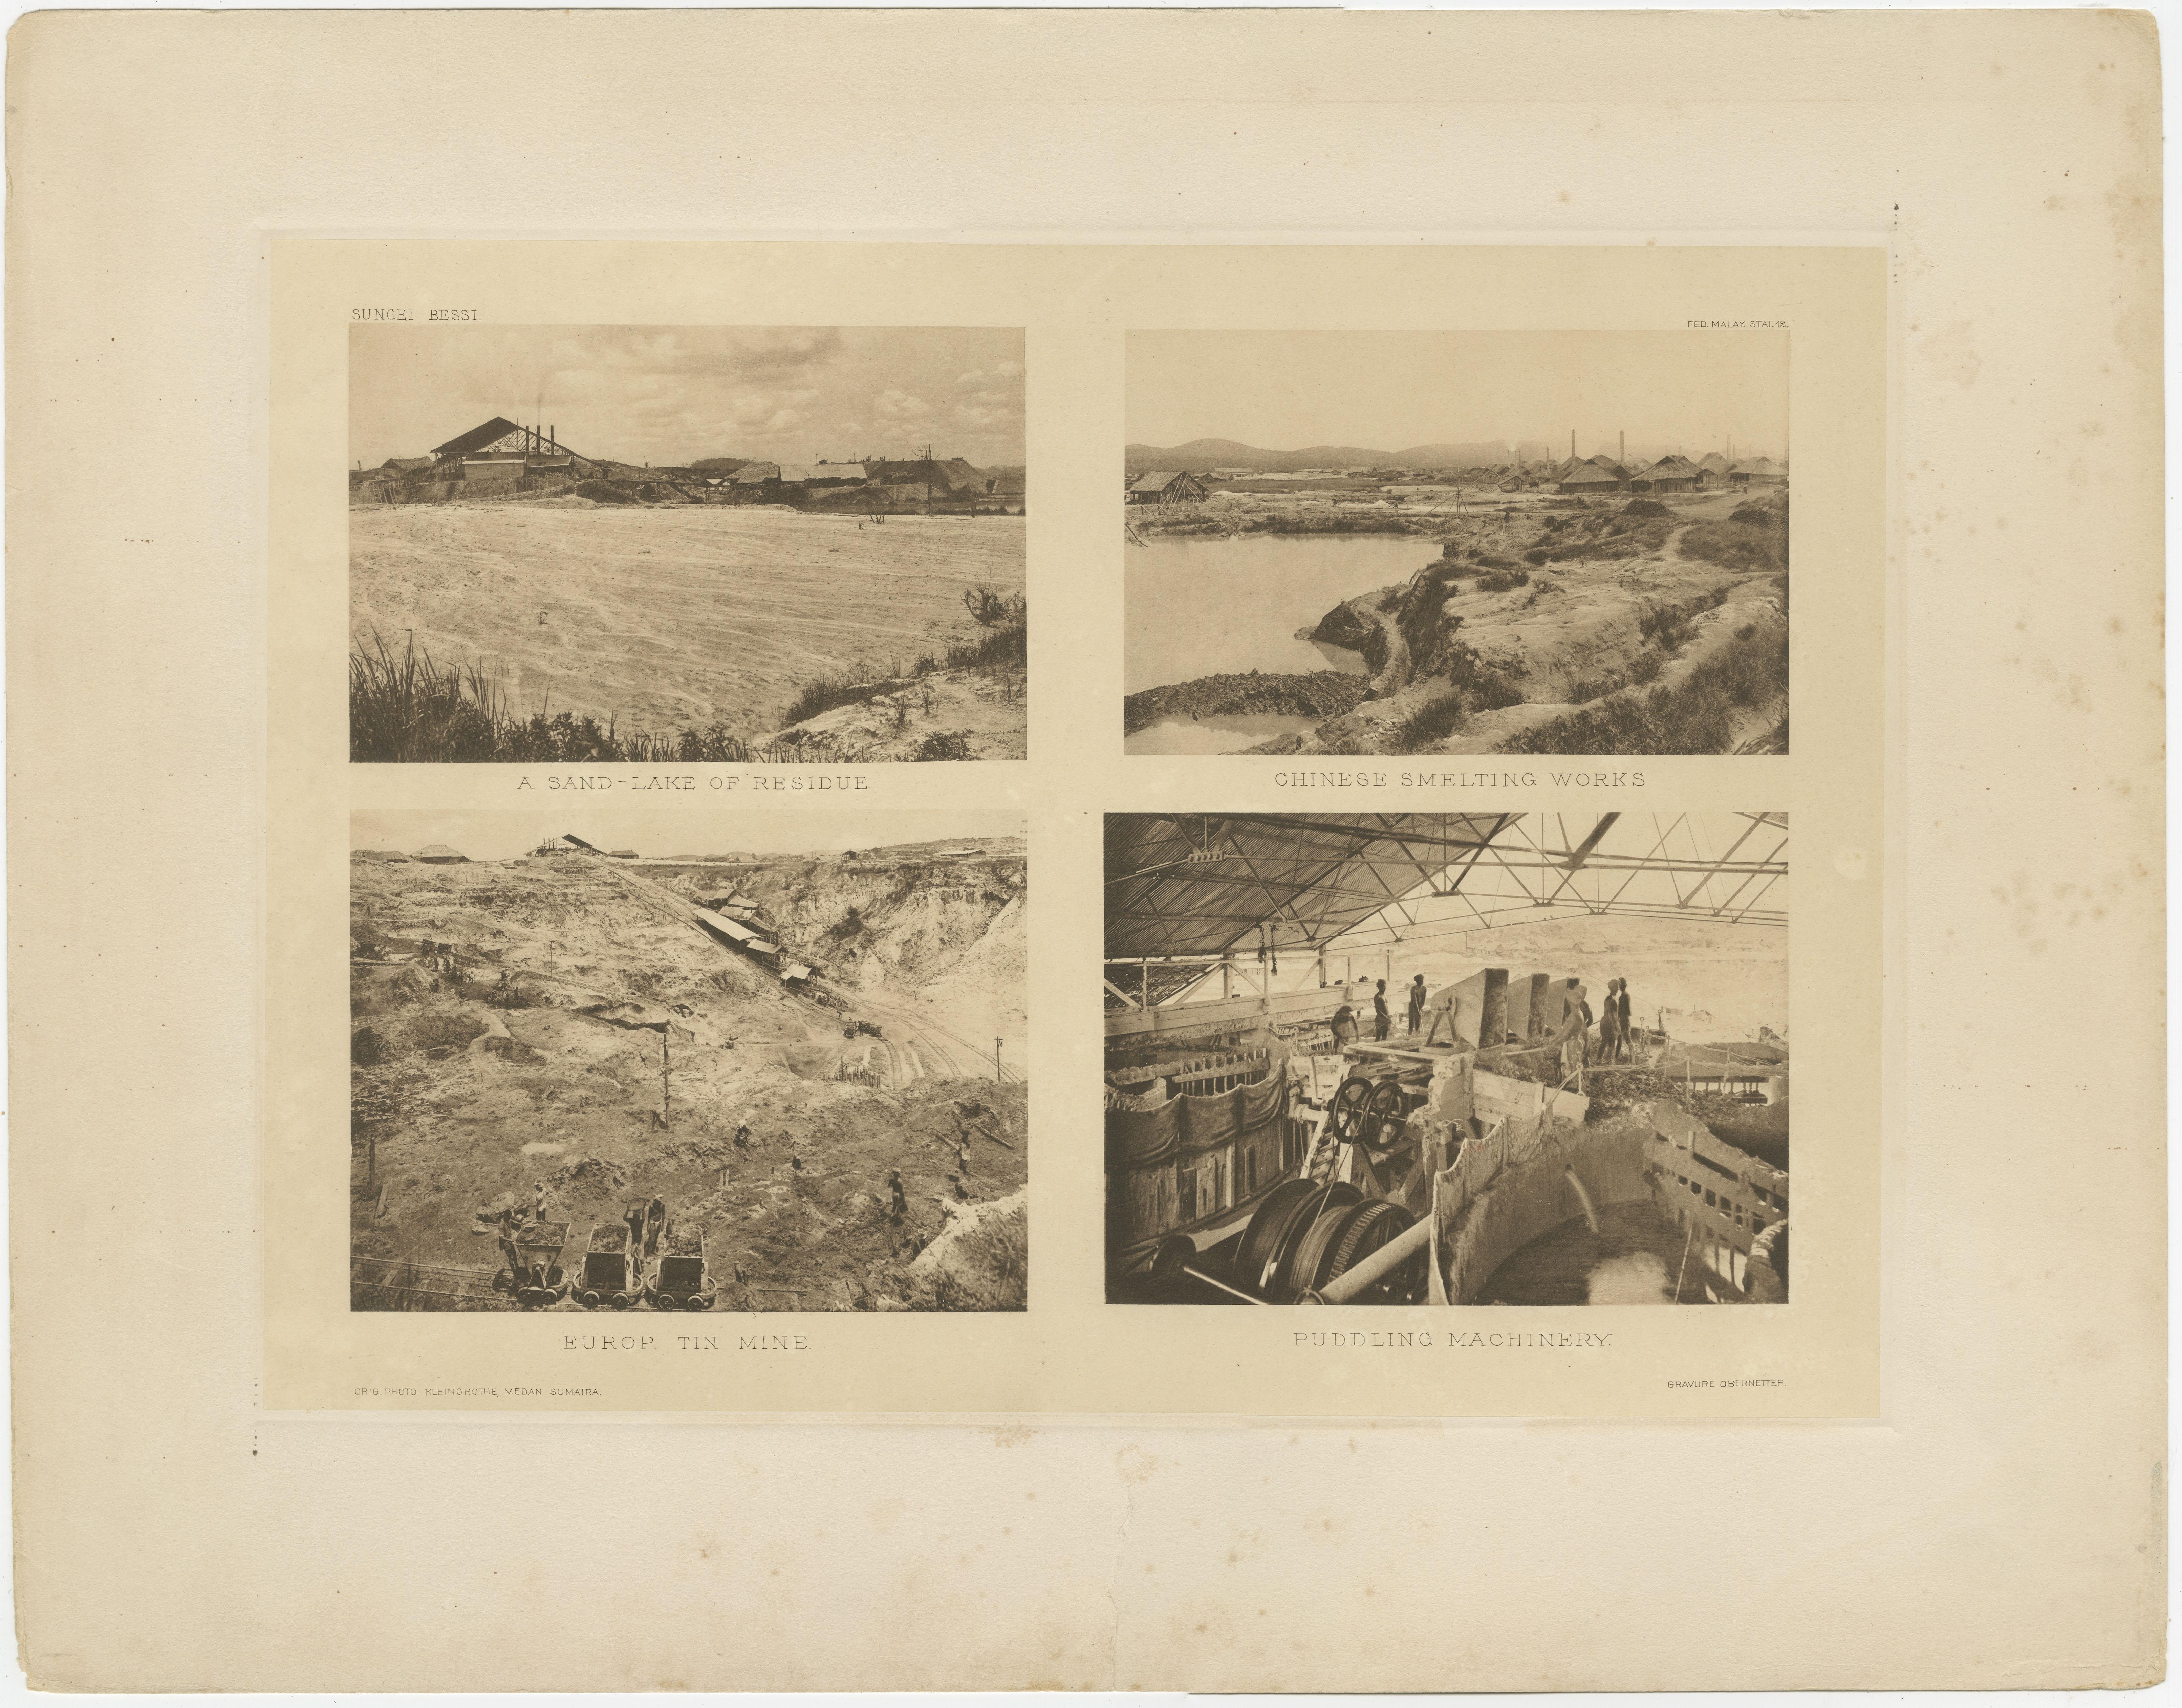 Four views of early Mining operations in Malaysia at the beginning of the 20th century. Published in 1907. 

1) A Sand-Lake of Residue (Sungai of Sungei Bessi)
2) Chinese Smelting Works
3) Europ Tin Mine
4) Puddling Machinery 

This